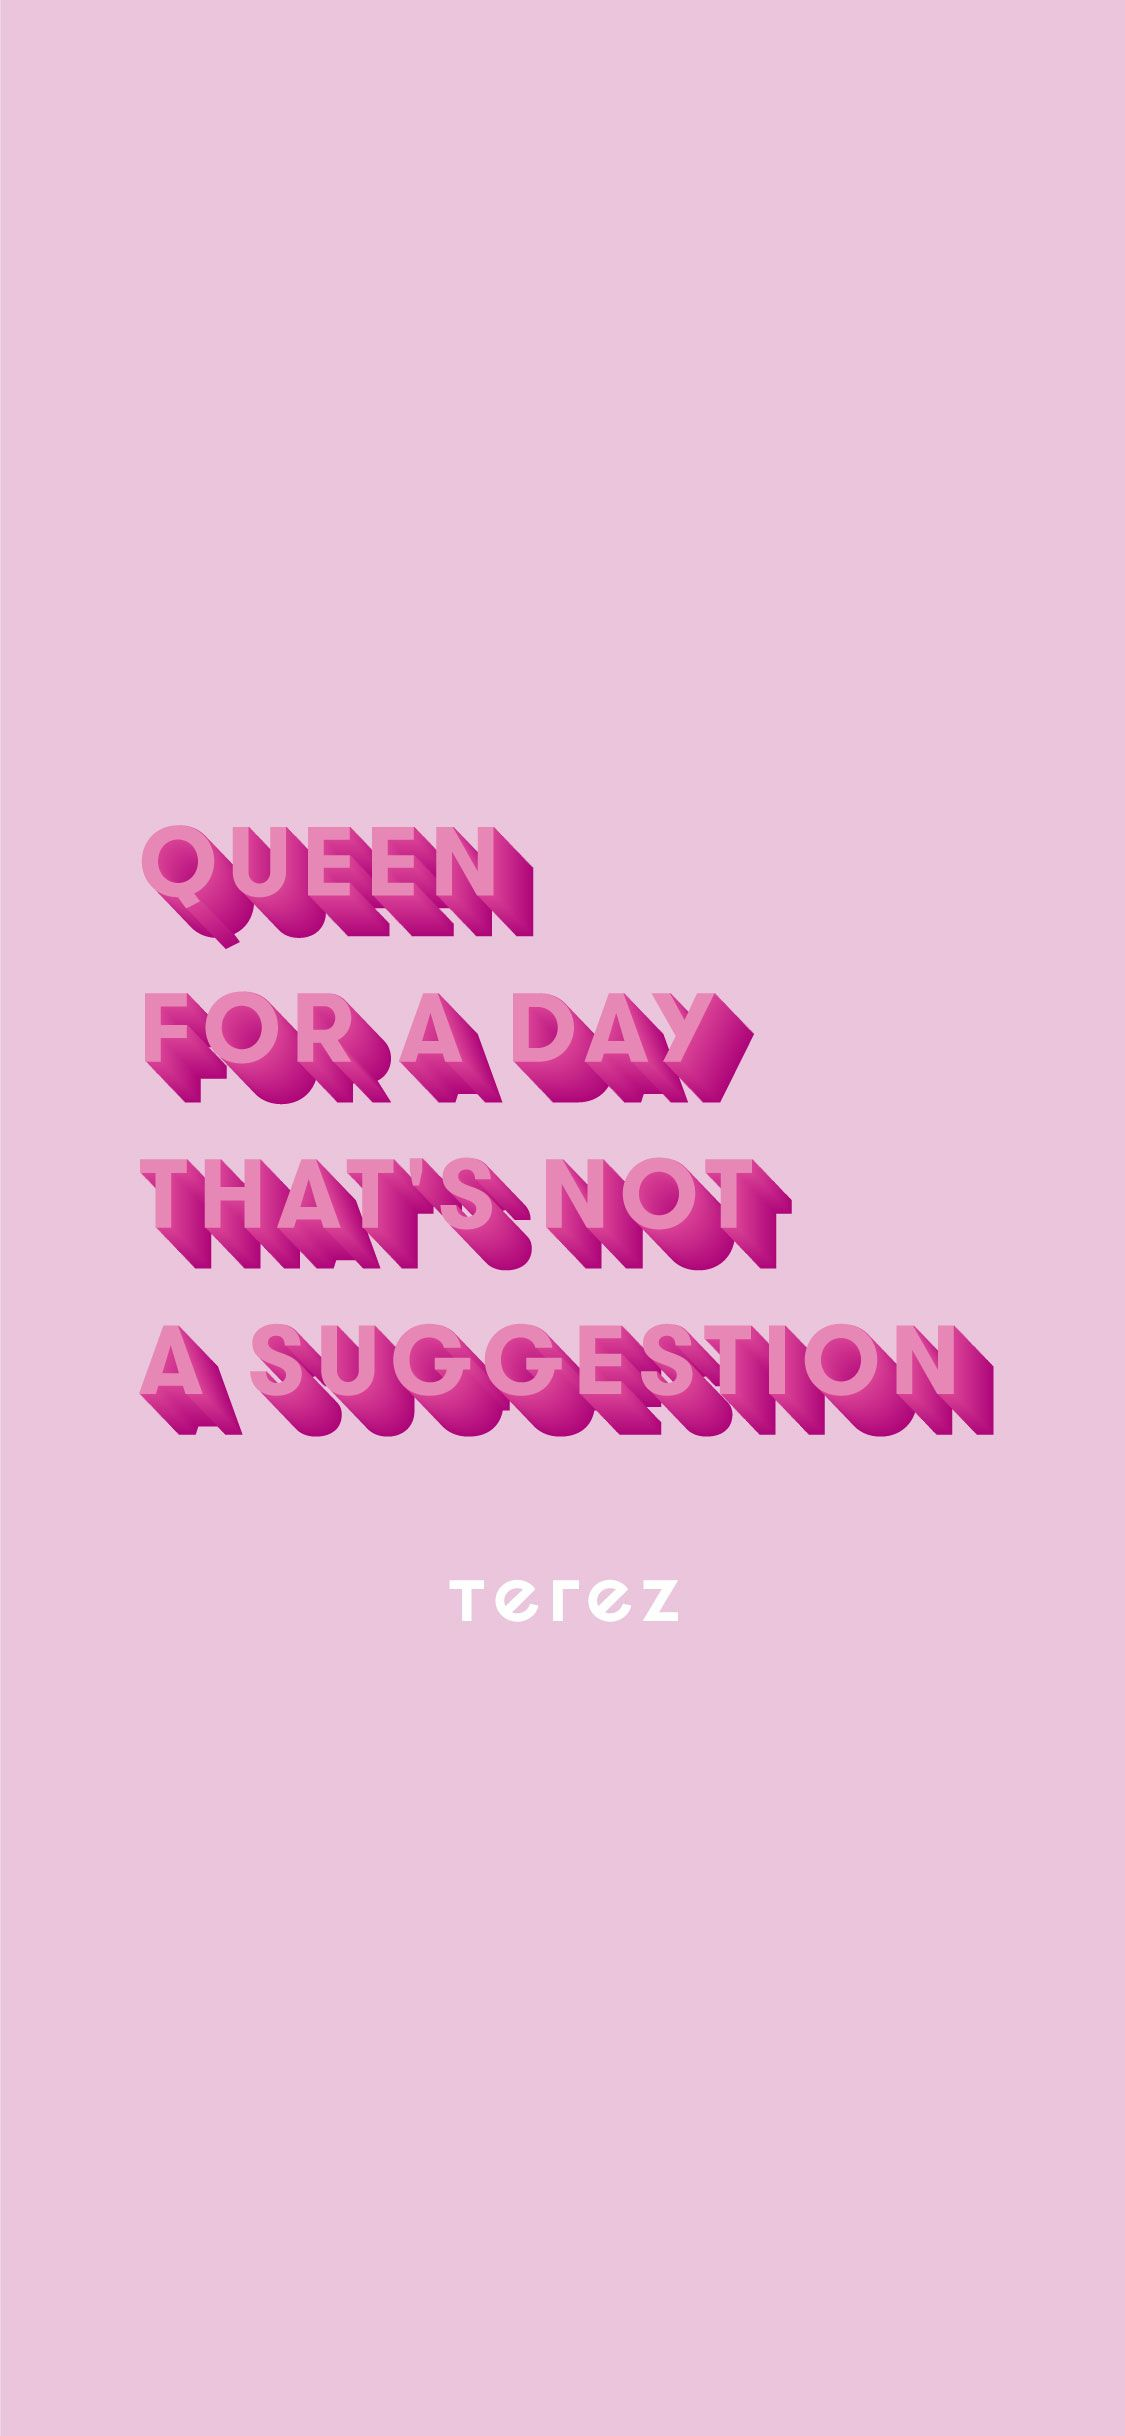 Queen for a day that's not submission - Quotes